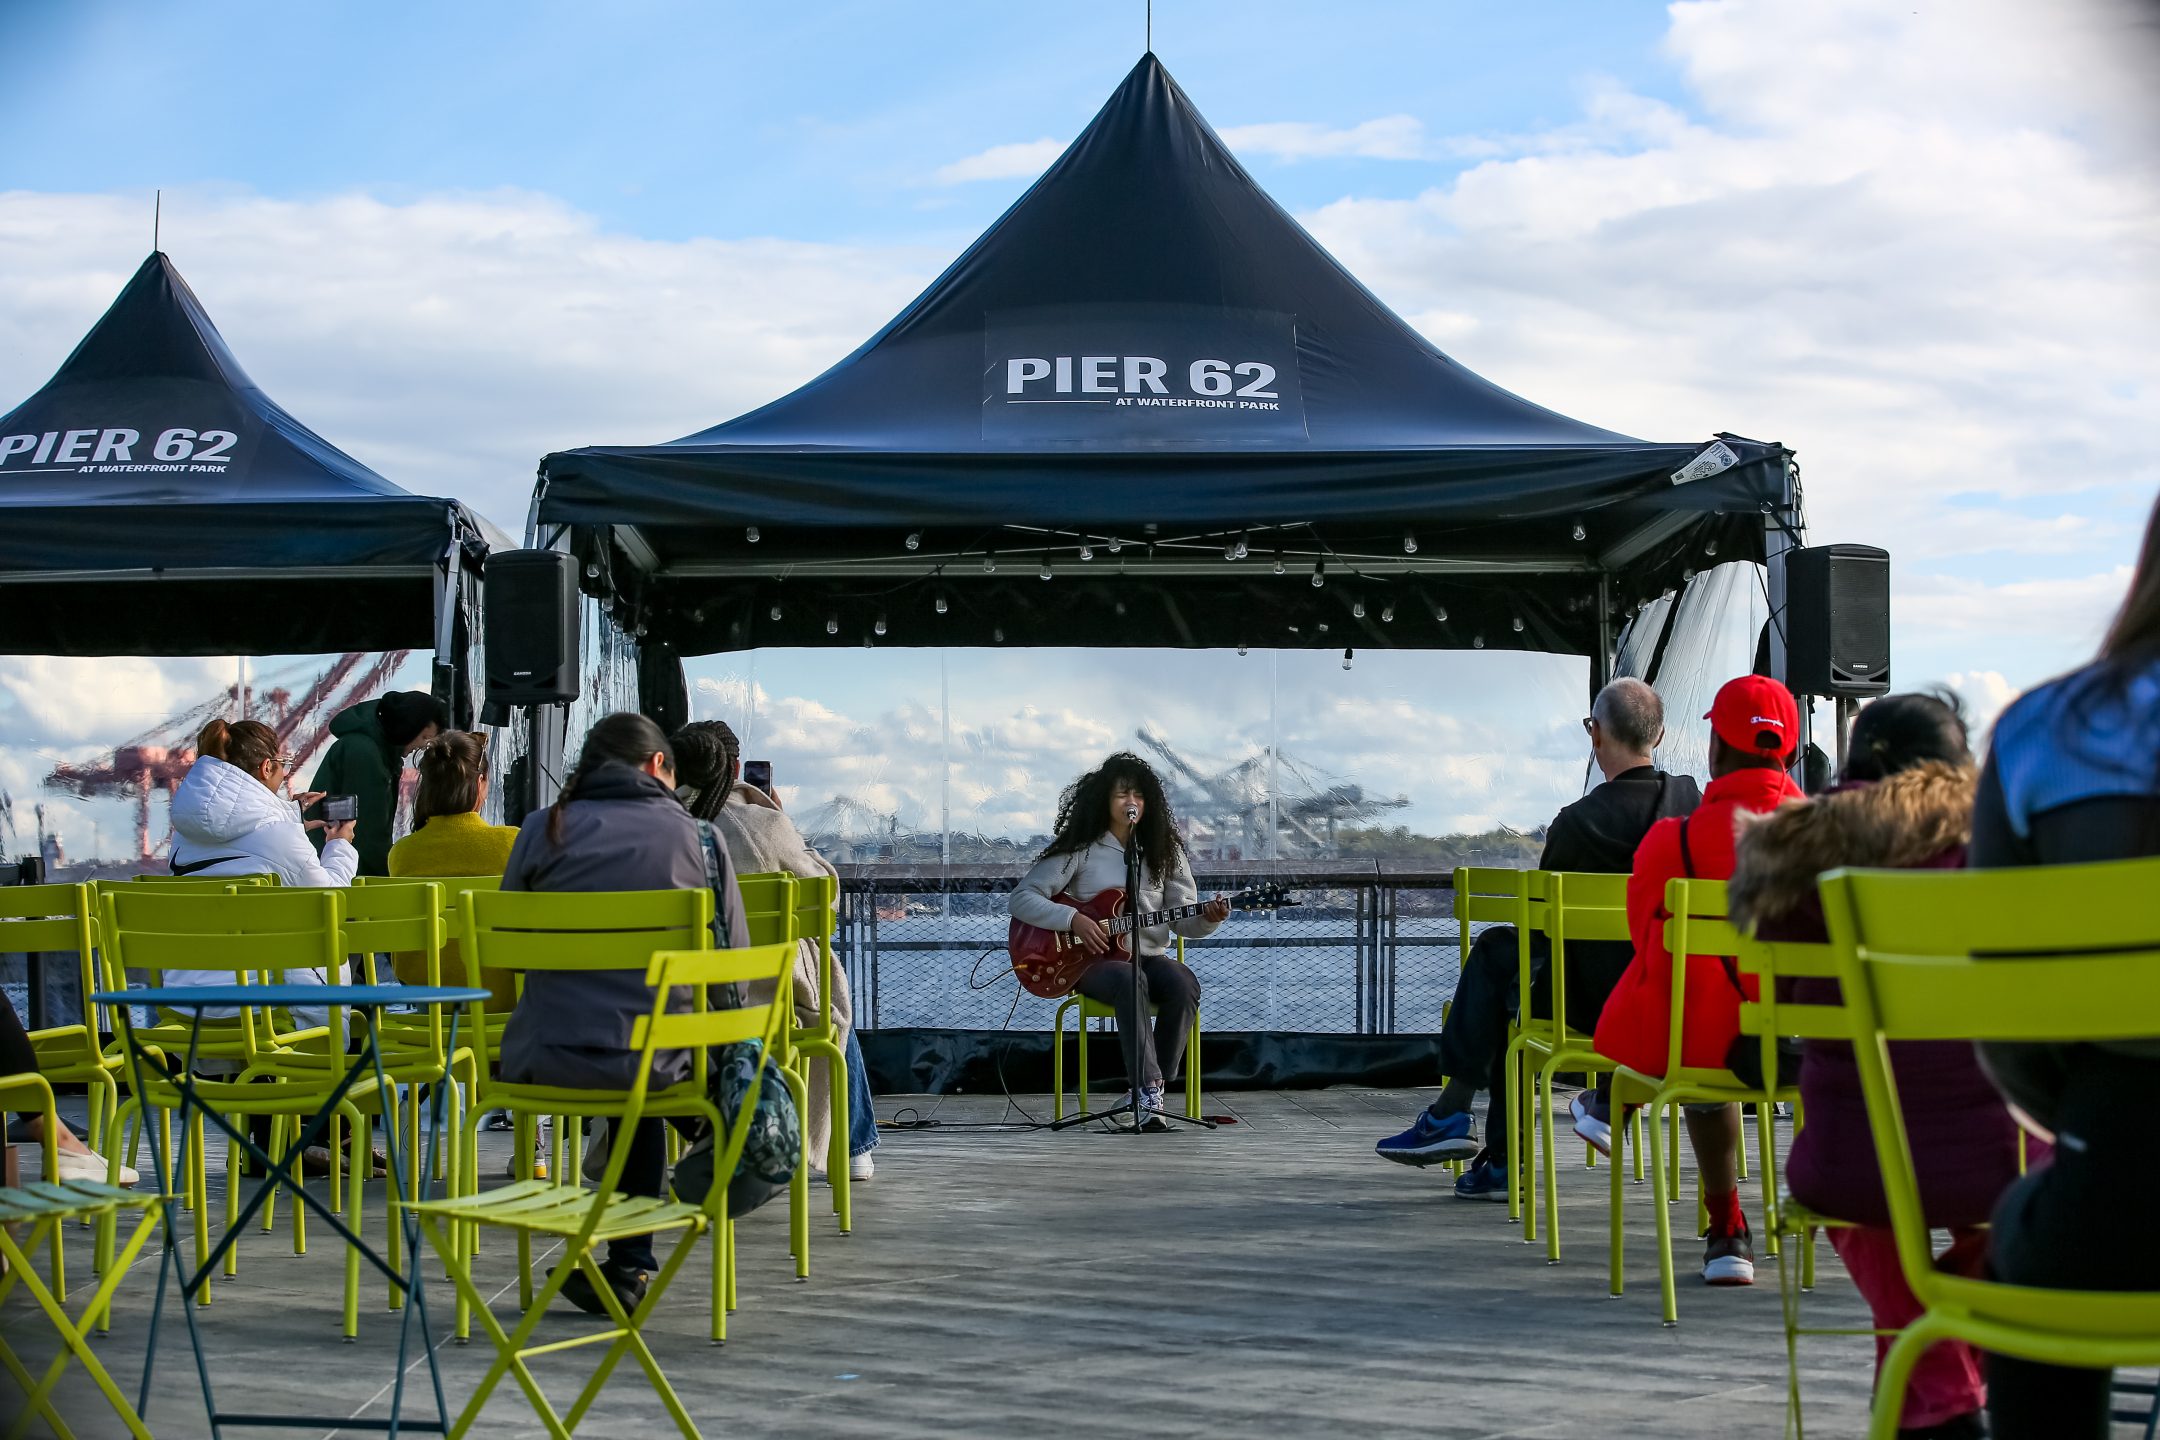 A light caramel-skinned women sits with a guitar, singing into a mic under a fancy black tent. In the foreground are attendees on neon yellow chairs, in the background is the Seattle skyline, Elliott Bay, and fluffy clouds with patches of blue sky.